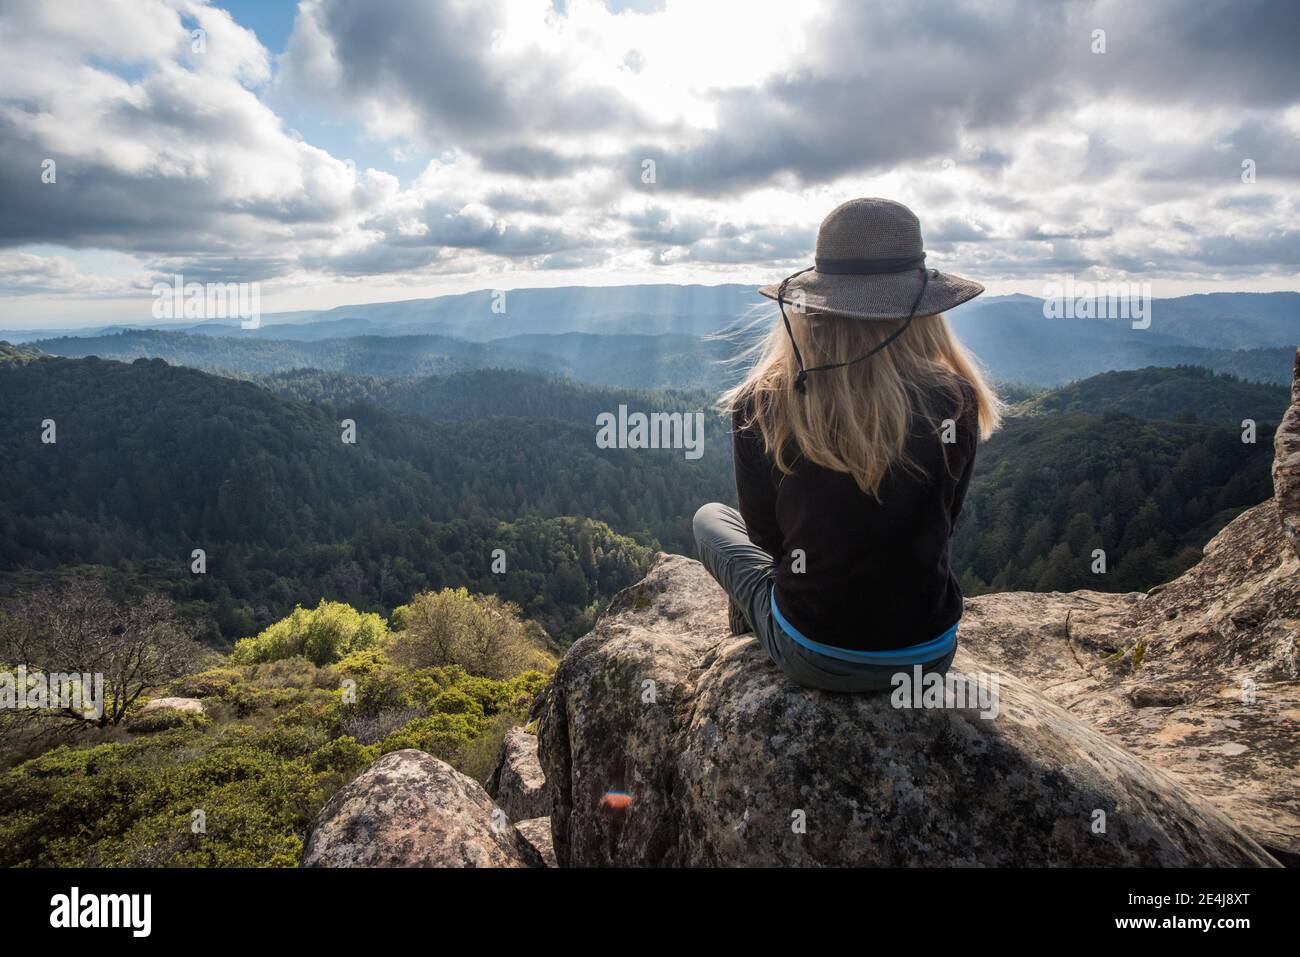 A woman sits looking out over the forested hills and wilderness of the Santa Cruz mountains in California. Stock Photo